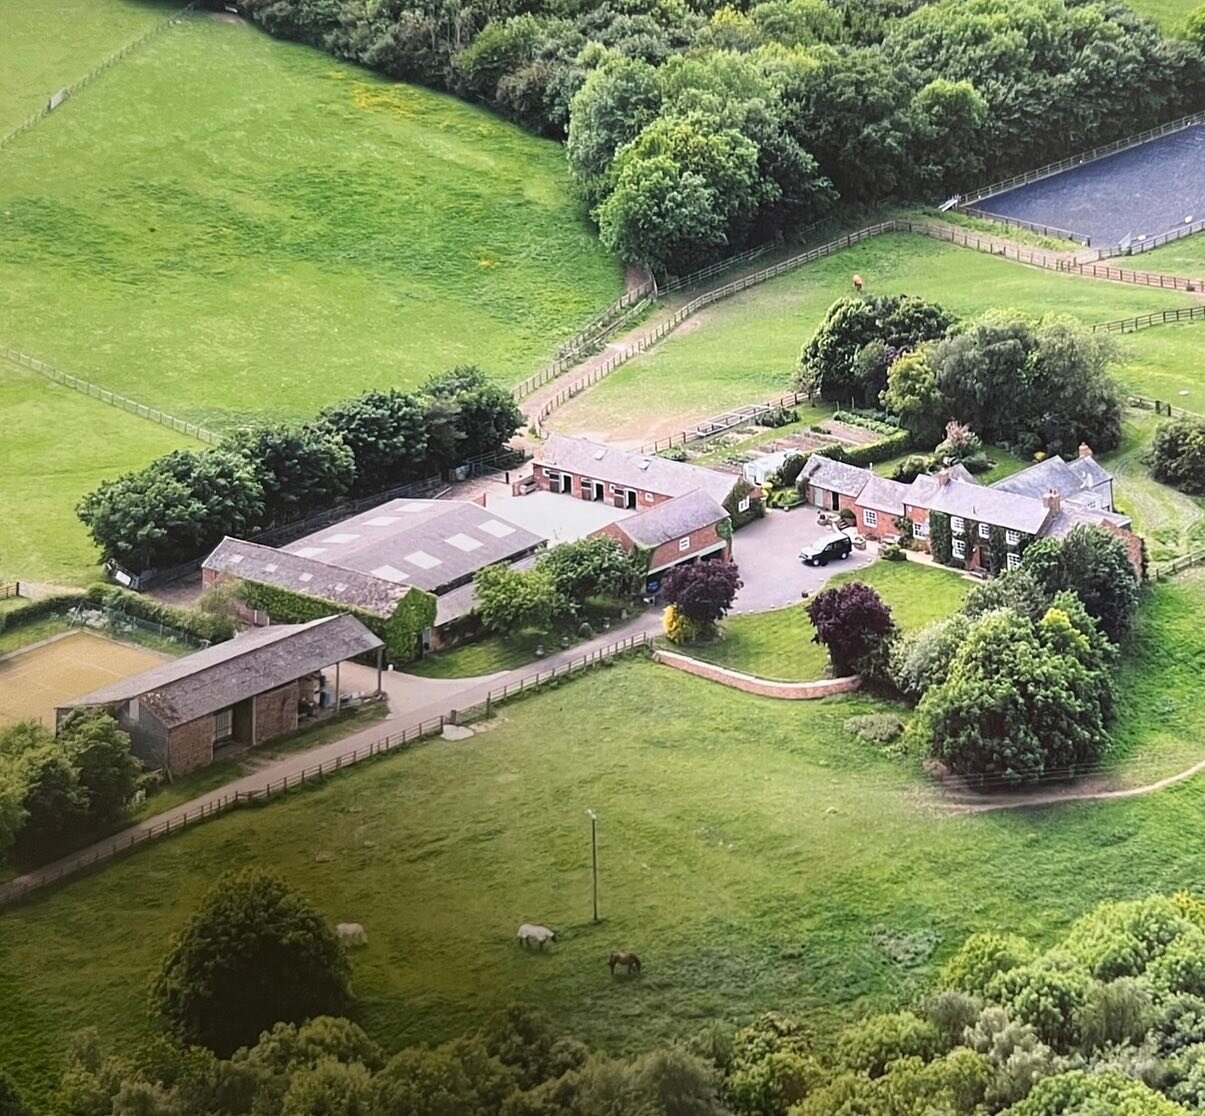 Planning approved!
Principle objectives for this project include to convert the existing barns into a four bedroom, sustainable dwelling with sensitive development that enhances the existing character, creating interior spaces that connect to the his